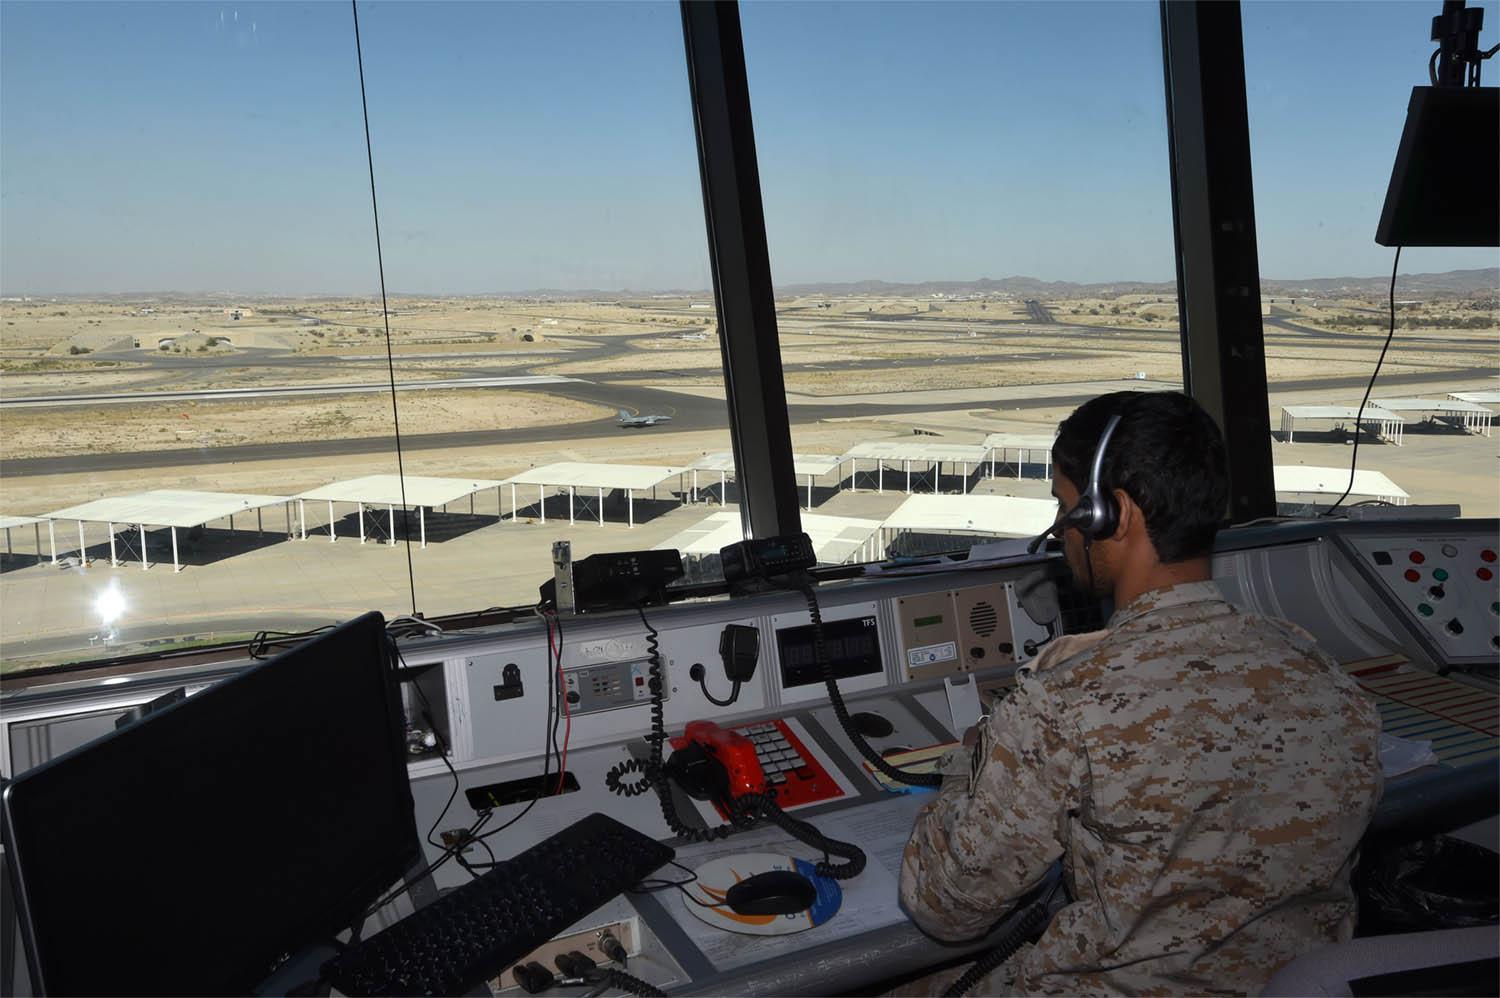 The Saudi air traffic controllers were extremely helpful 